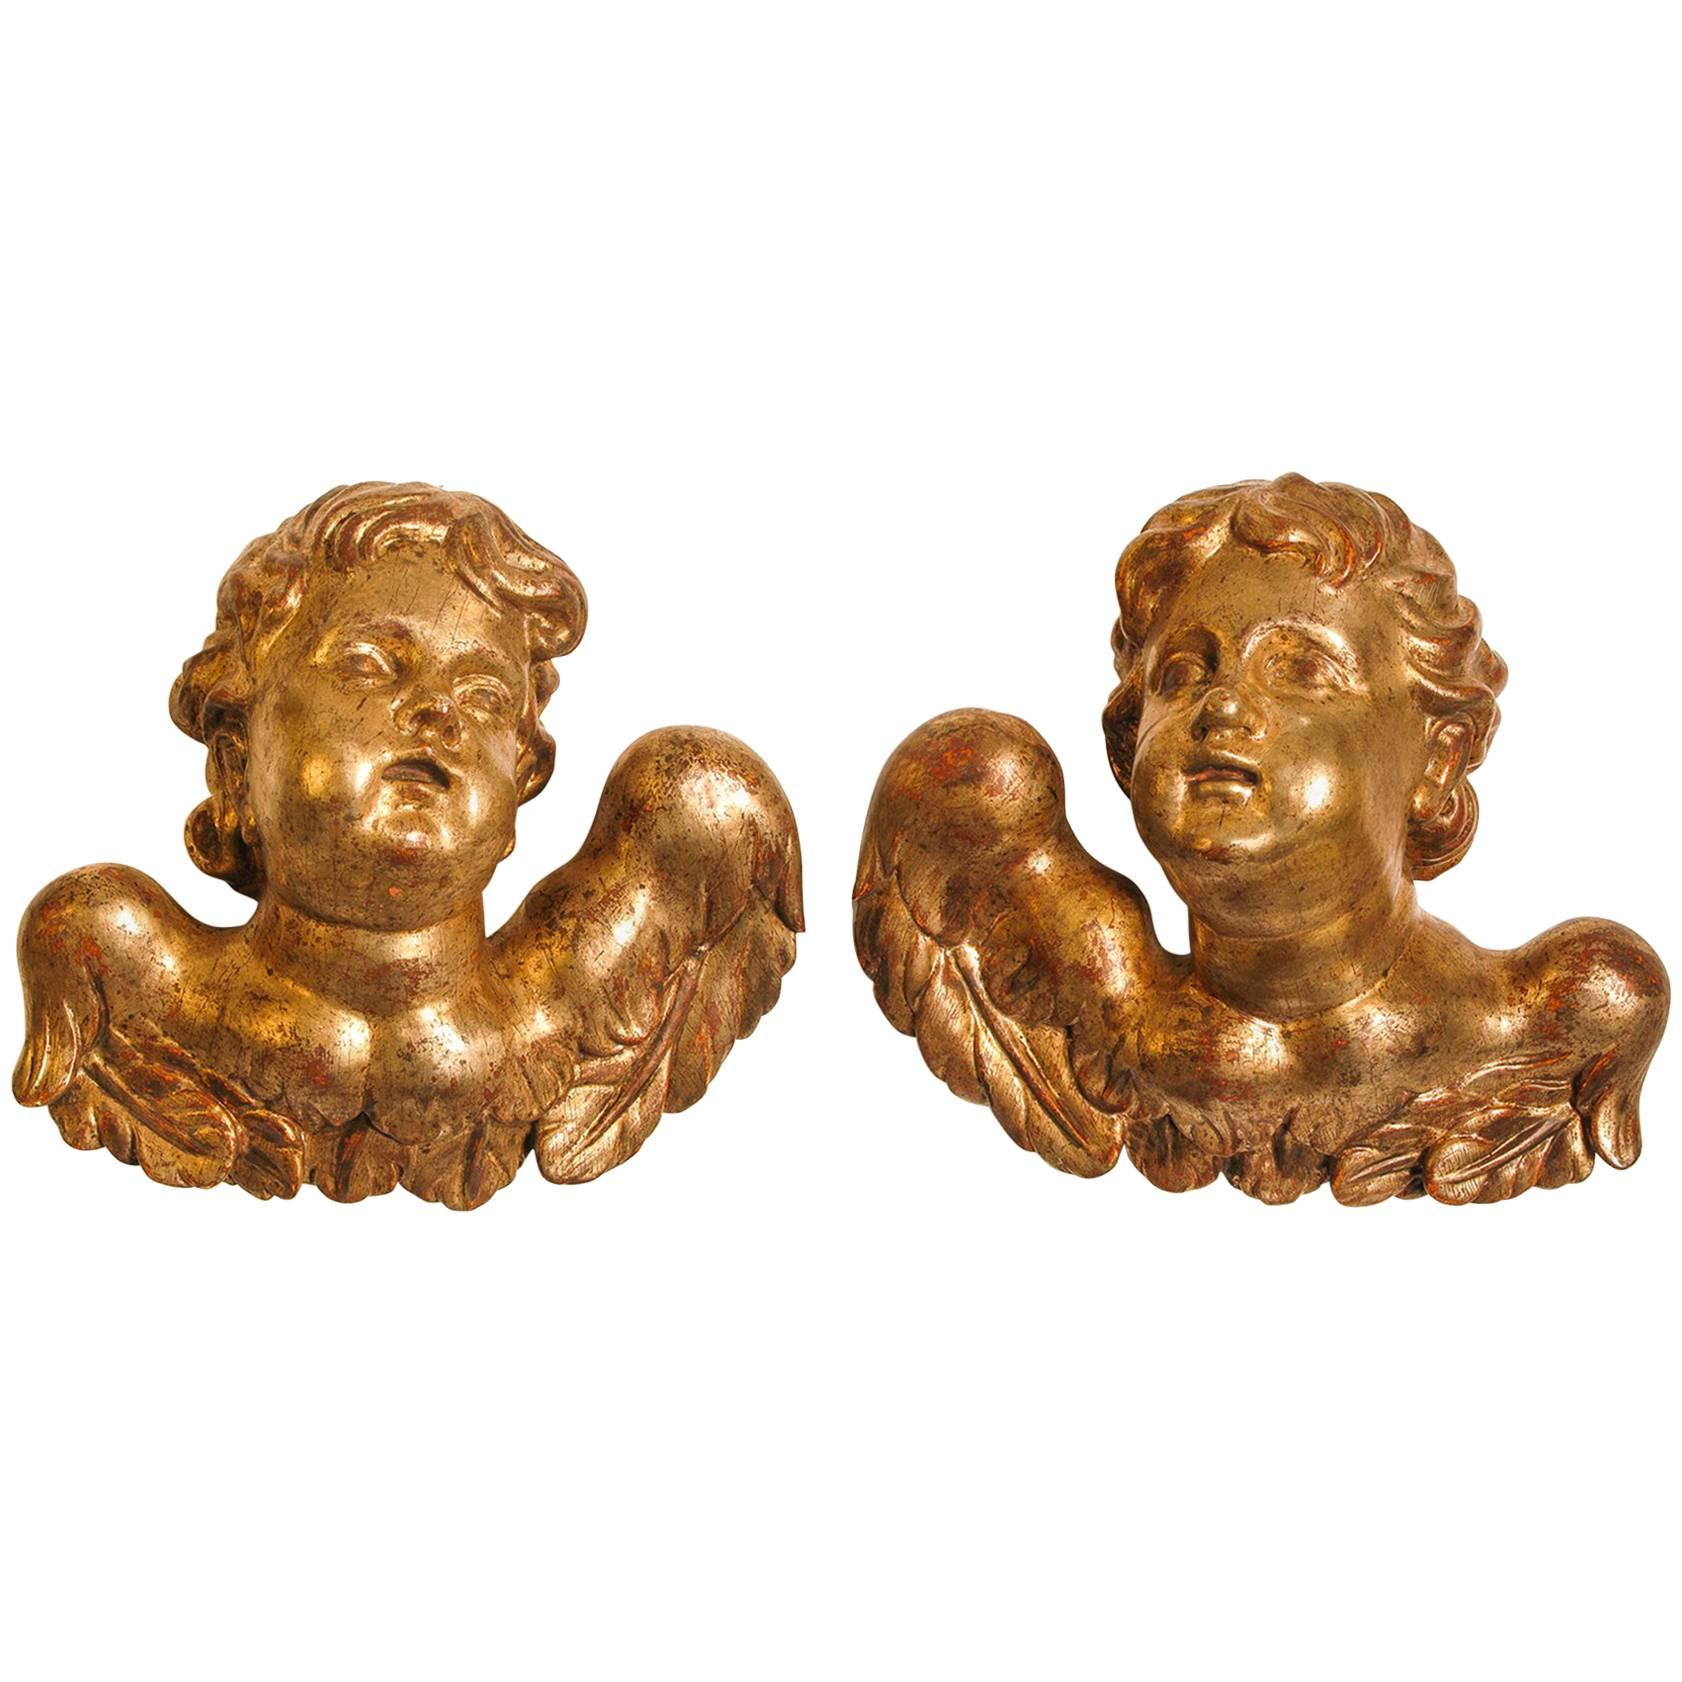 Carved and Gilded Wood Angels Sculptures from Venise